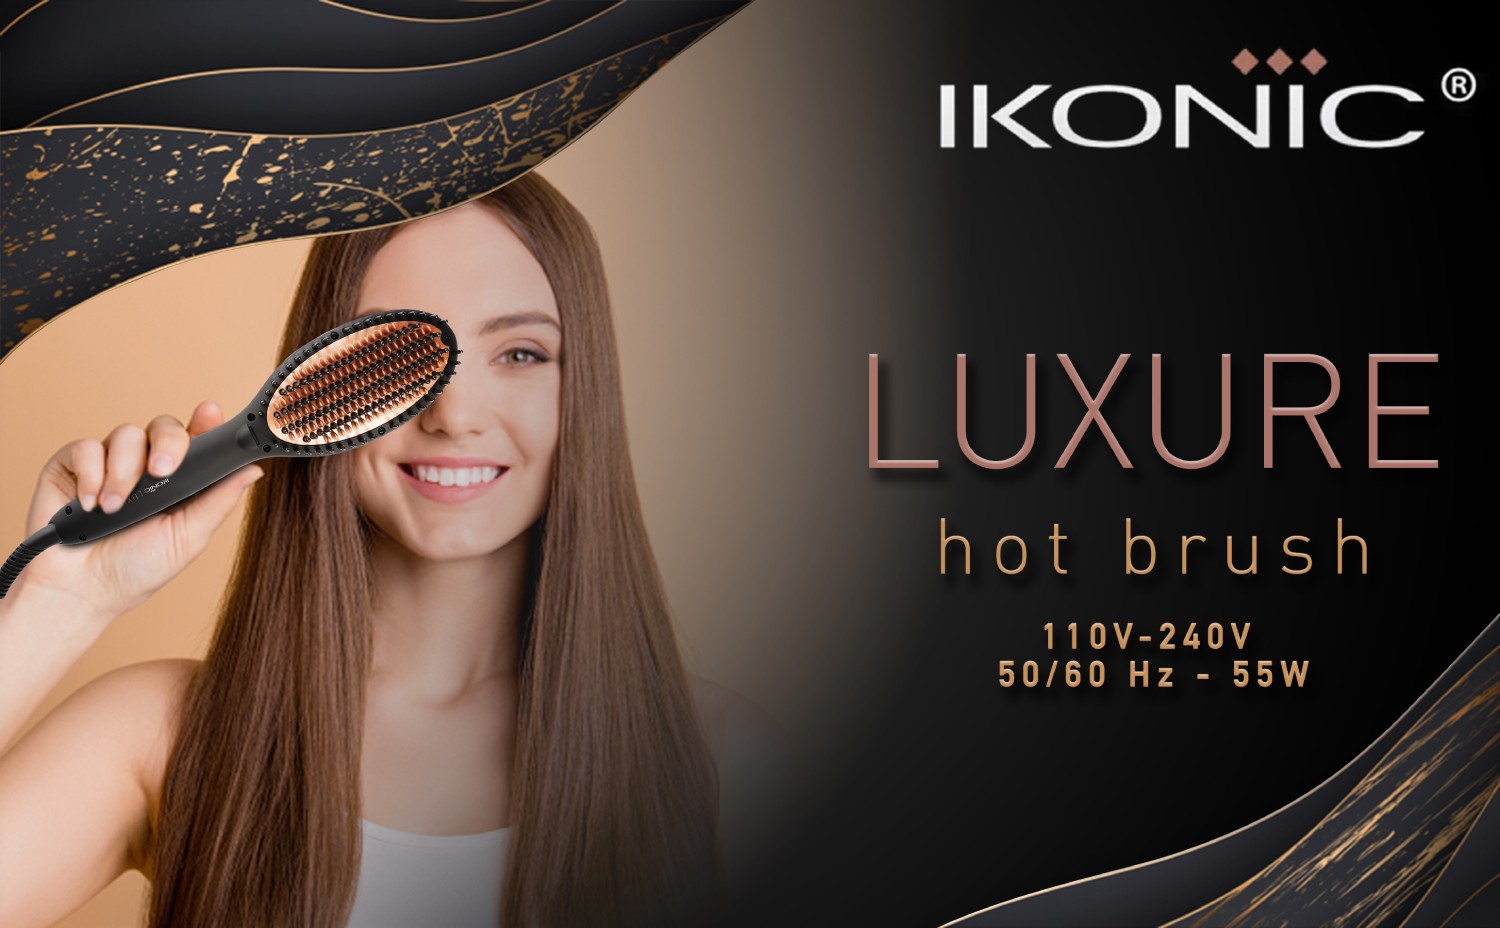 Luxure Hot Brush Product Banner